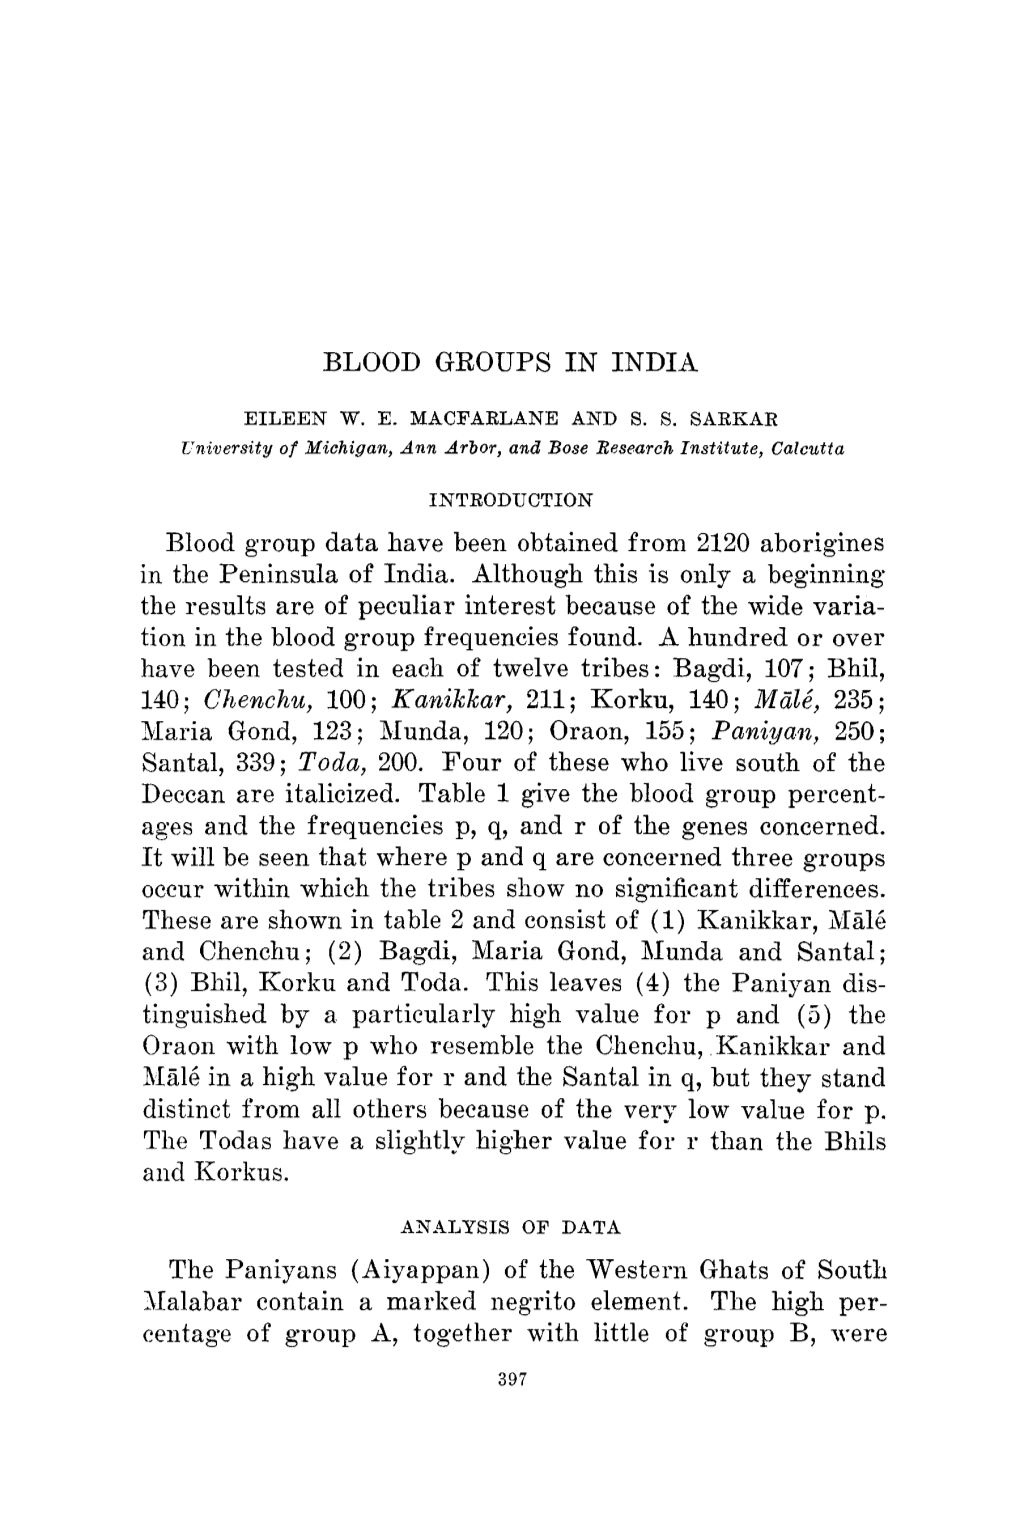 Blood Groups in India